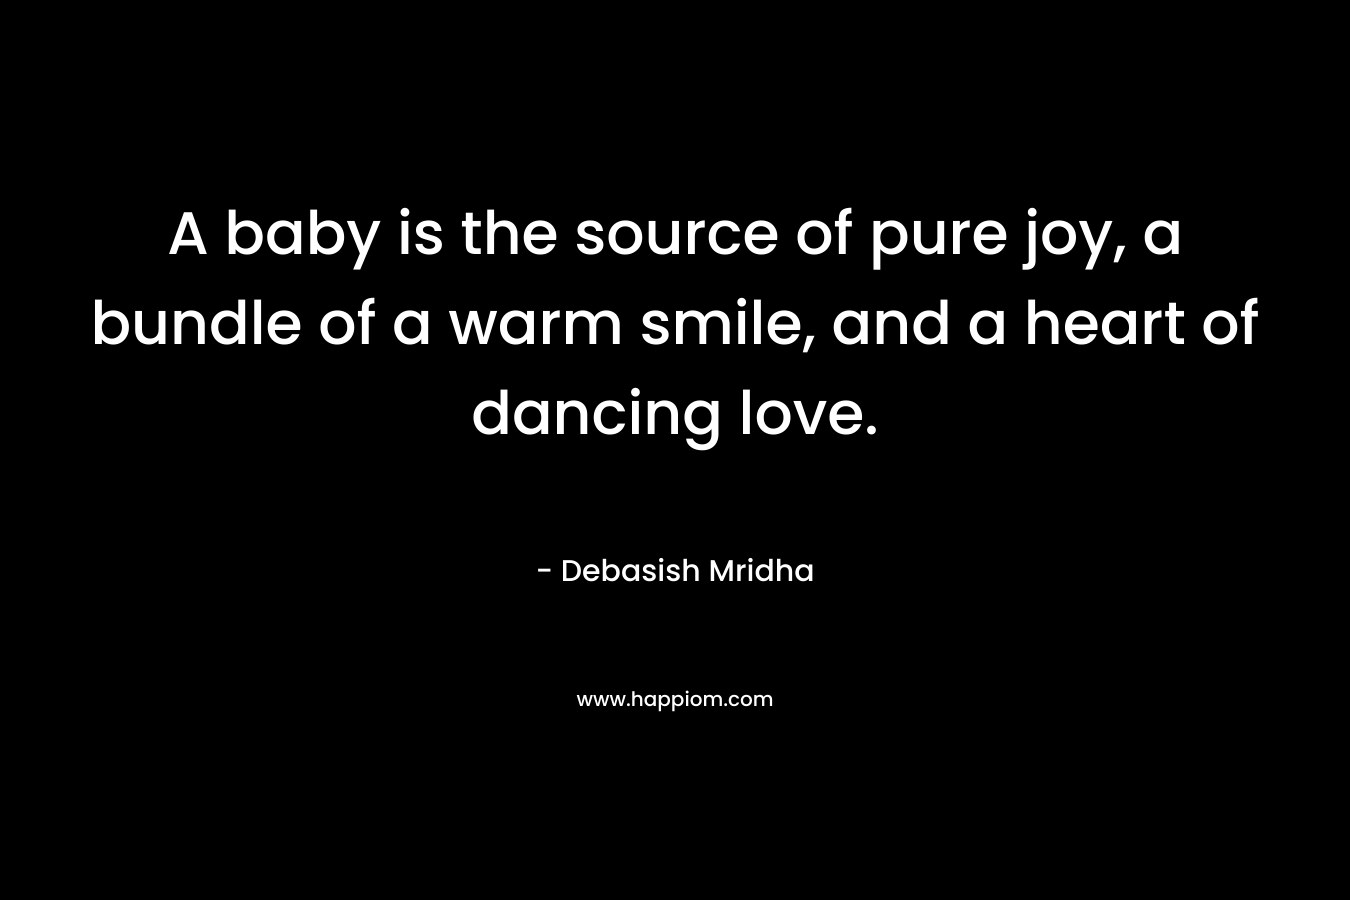 A baby is the source of pure joy, a bundle of a warm smile, and a heart of dancing love. – Debasish Mridha